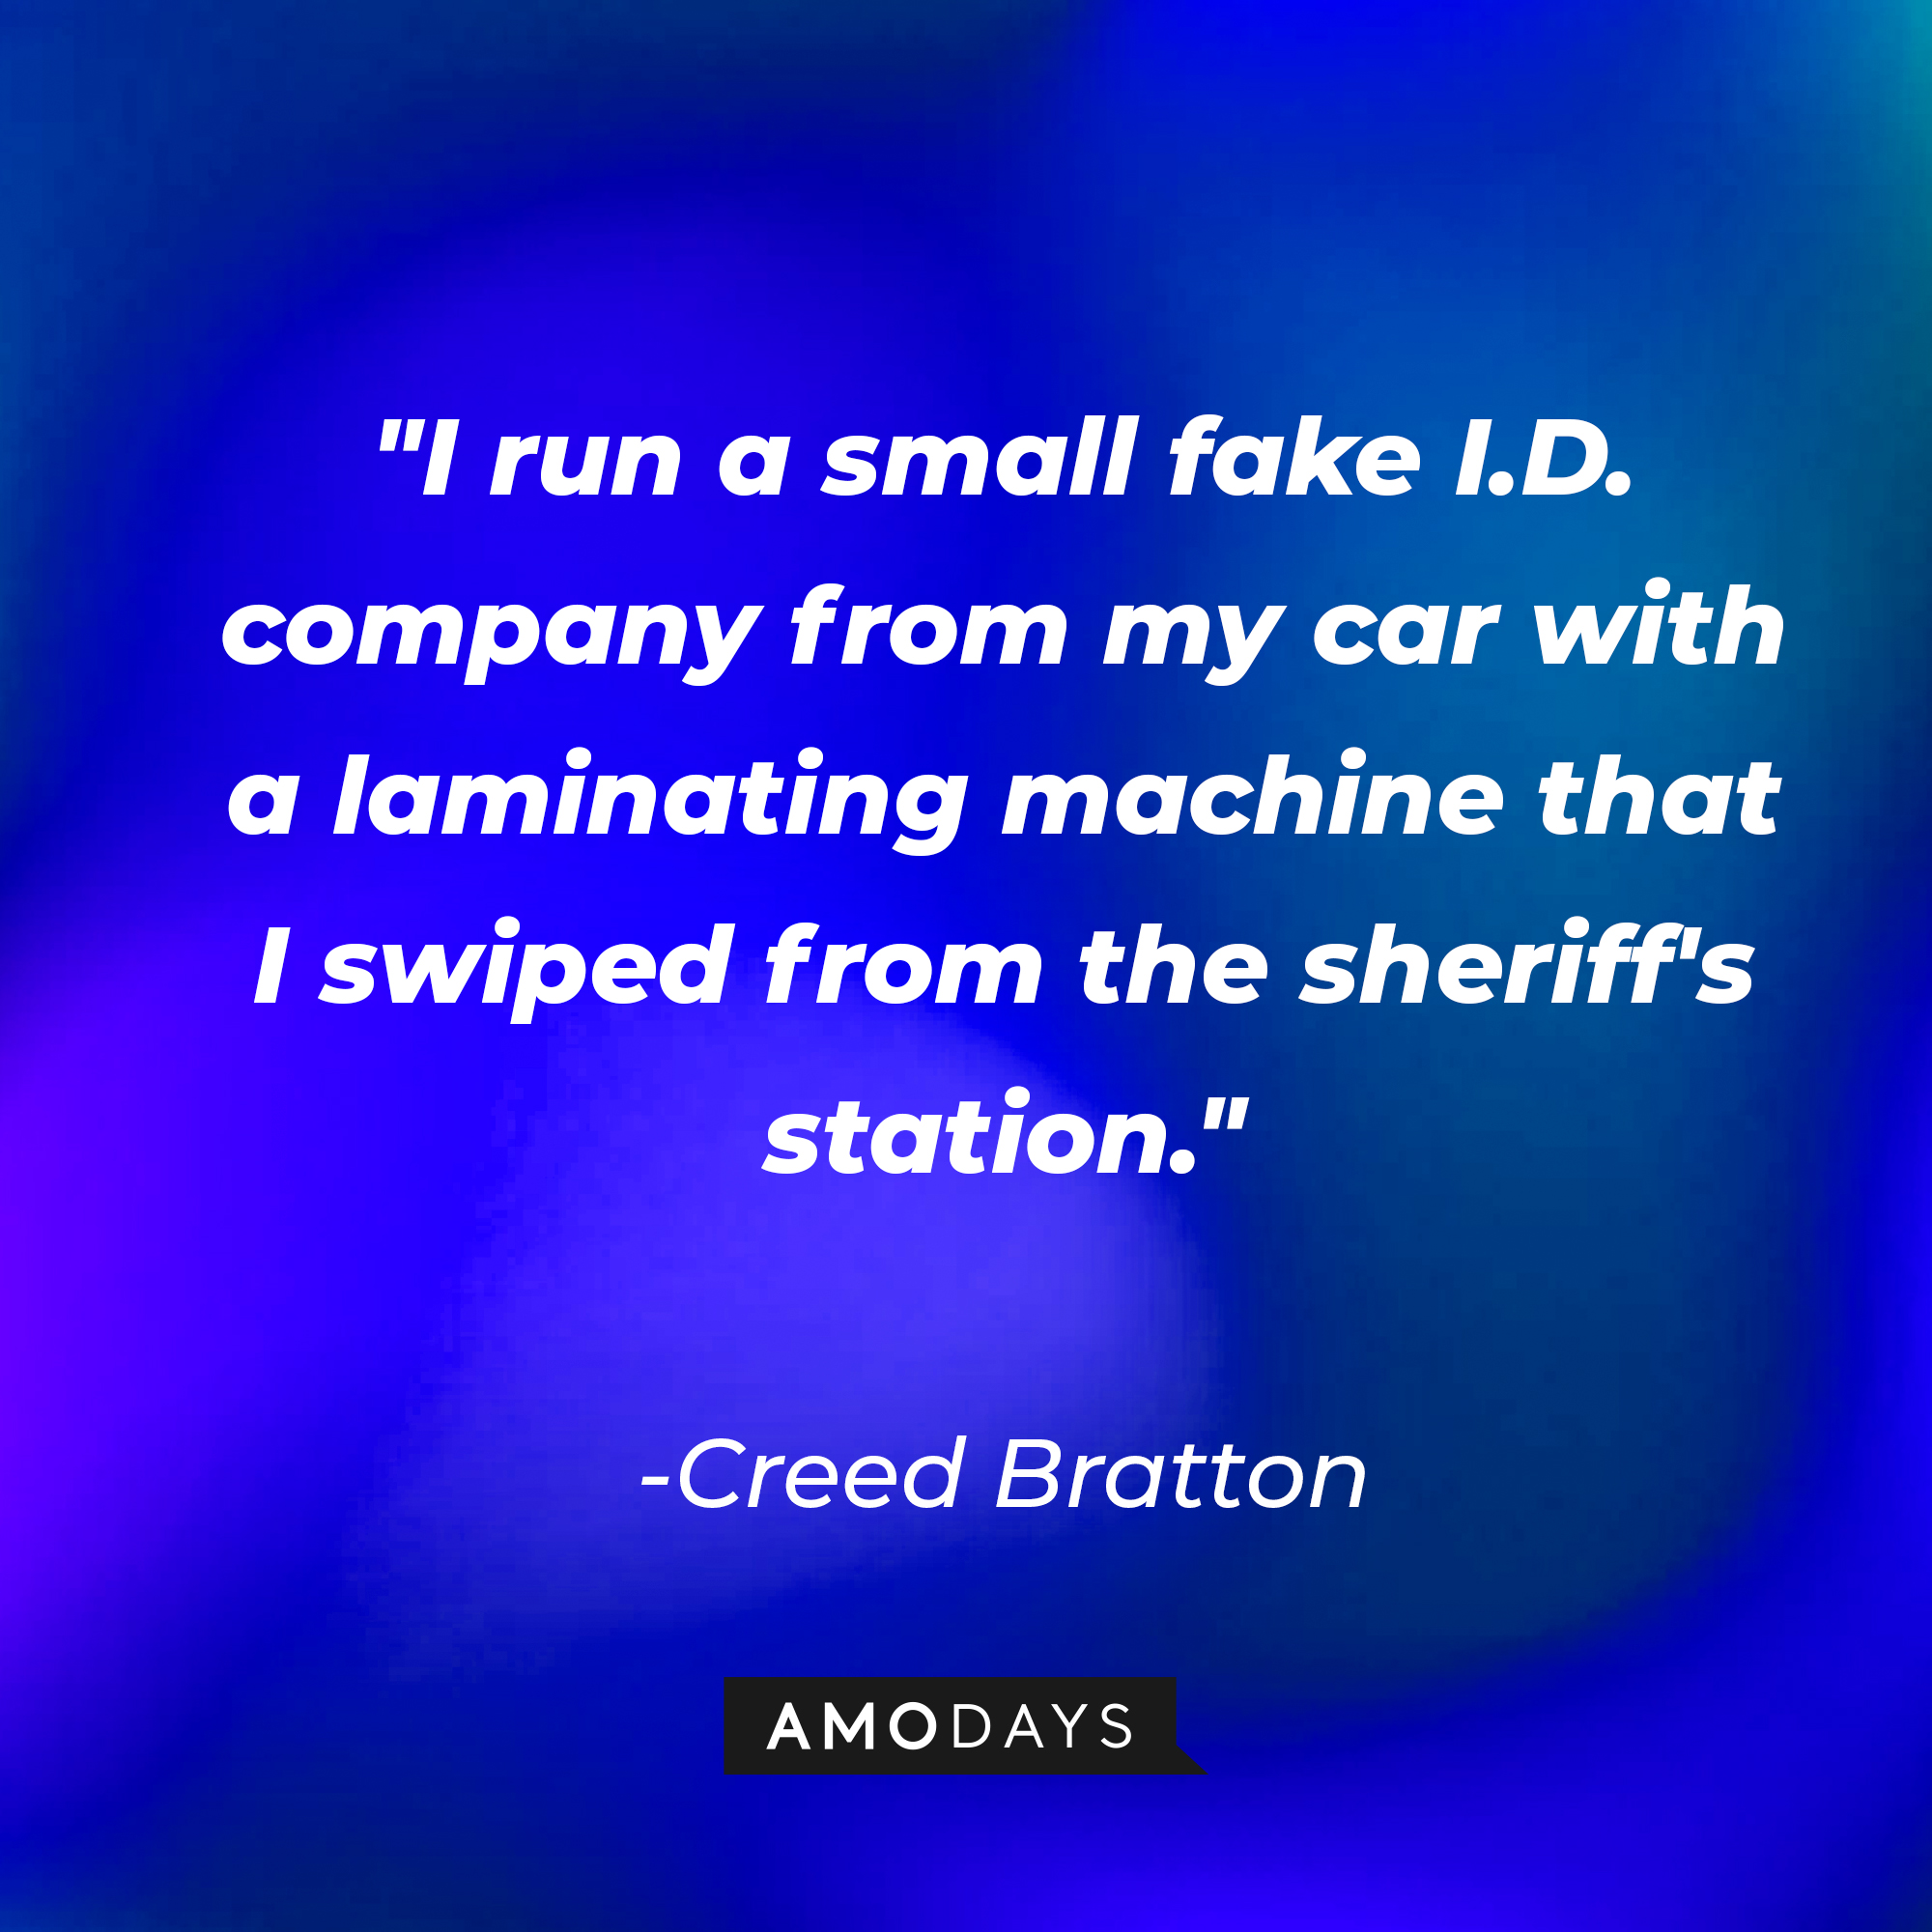 Creed Bratton's quote: "I run a small fake I.D. company from my car with a laminating machine that I swiped from the sheriff's station." | Source: AmoDays